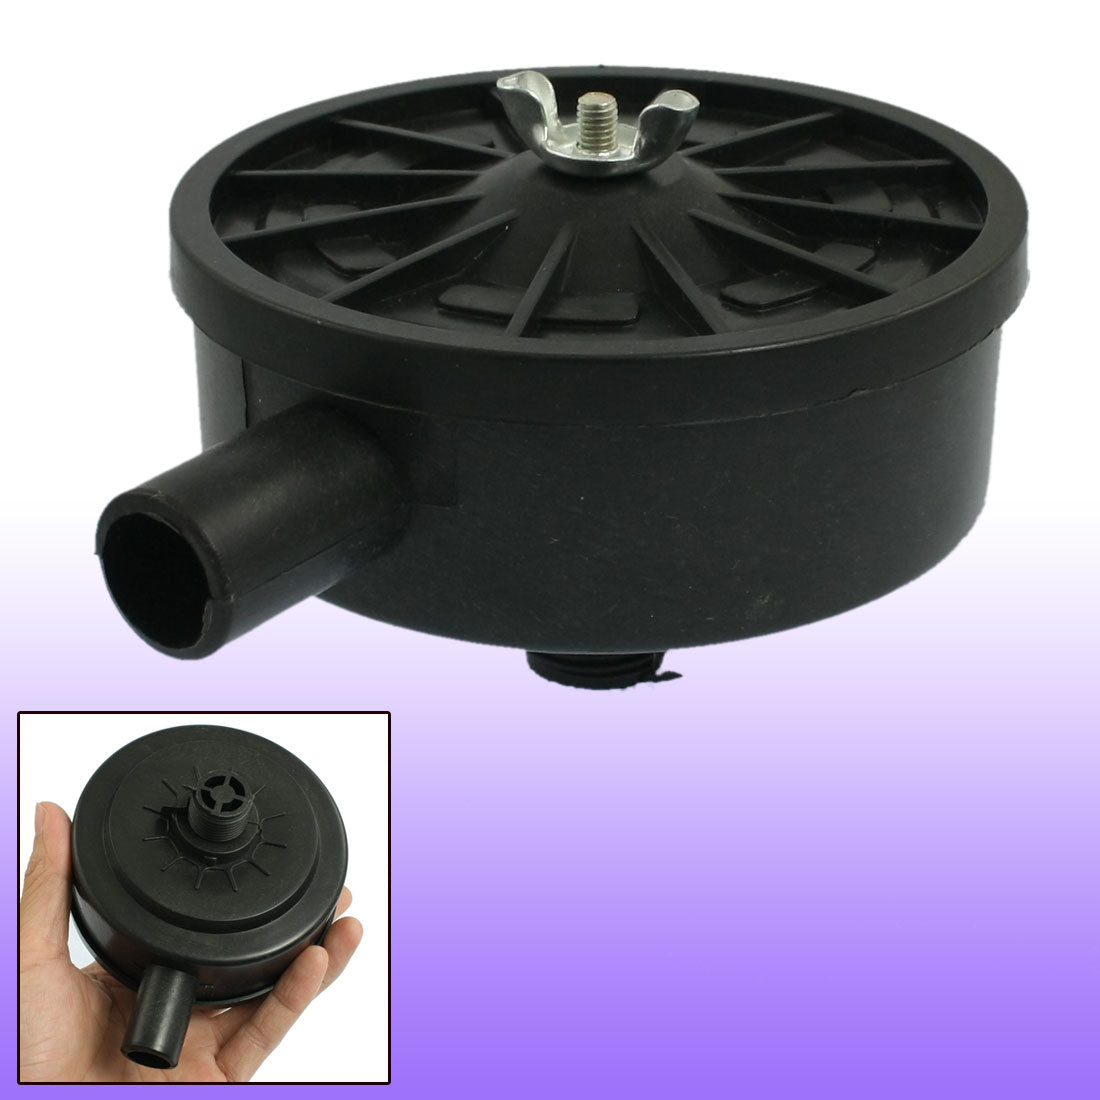 uxcell Uxcell 1/2" PT Male Thread Black Plastic 10cm Dia Filter Silencer for Air Compressor